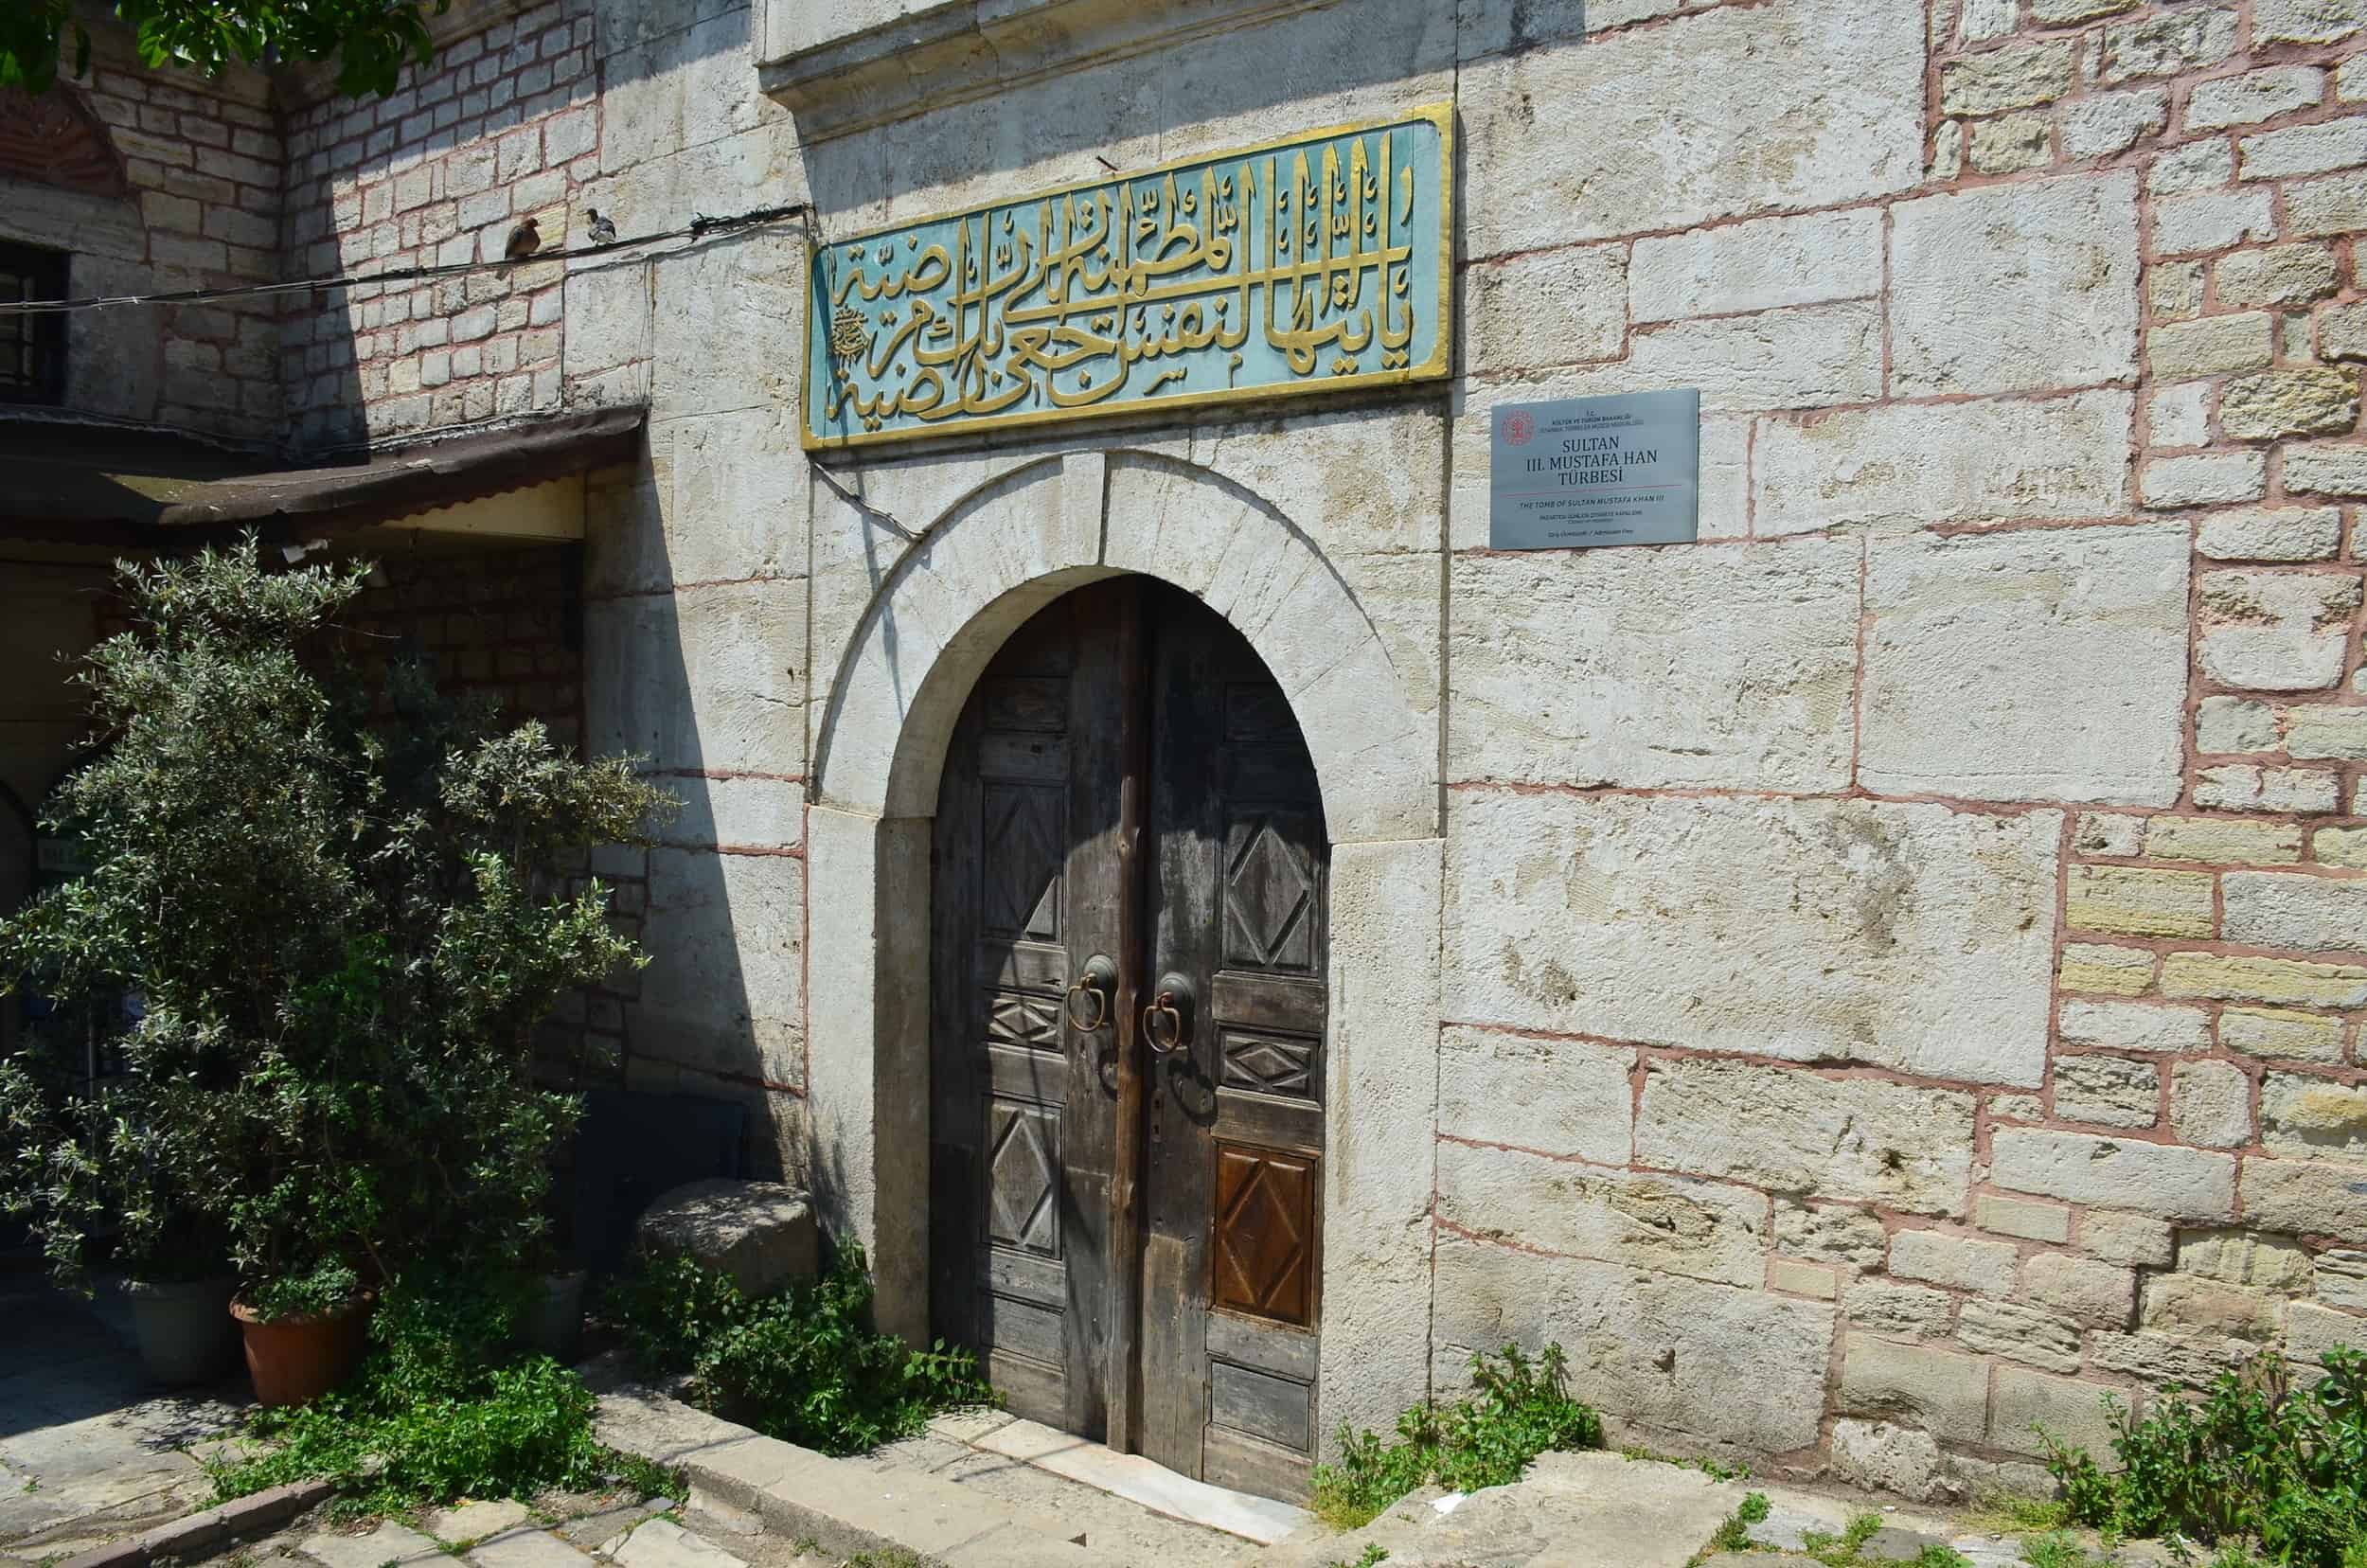 Entrance to the Tomb of Mustafa III at the Laleli Mosque, Istanbul, Turkey